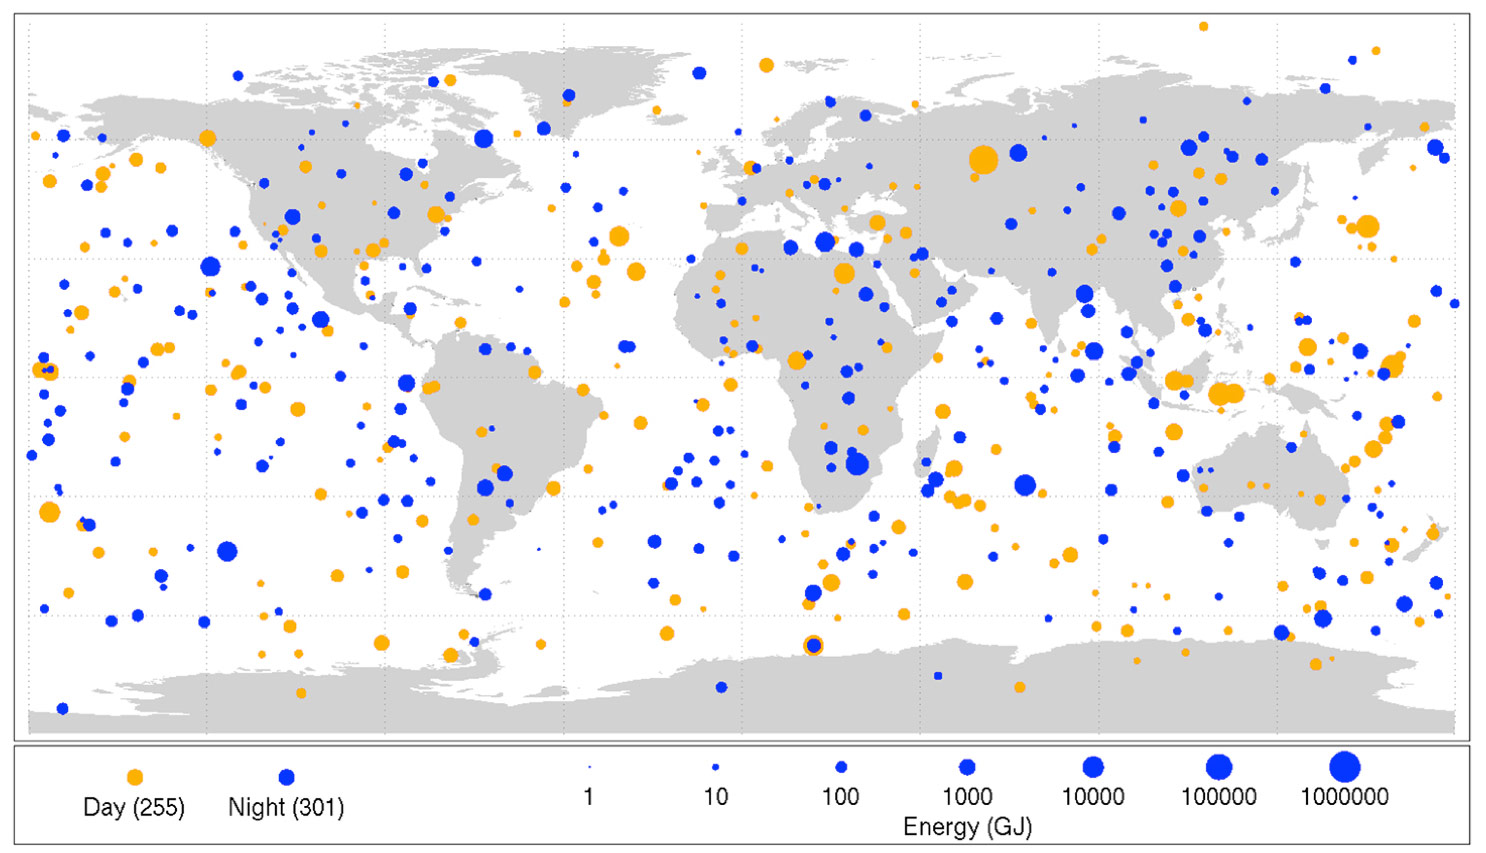 Small asteroid 'bolide' impacts between 1994-2013. (NASA)